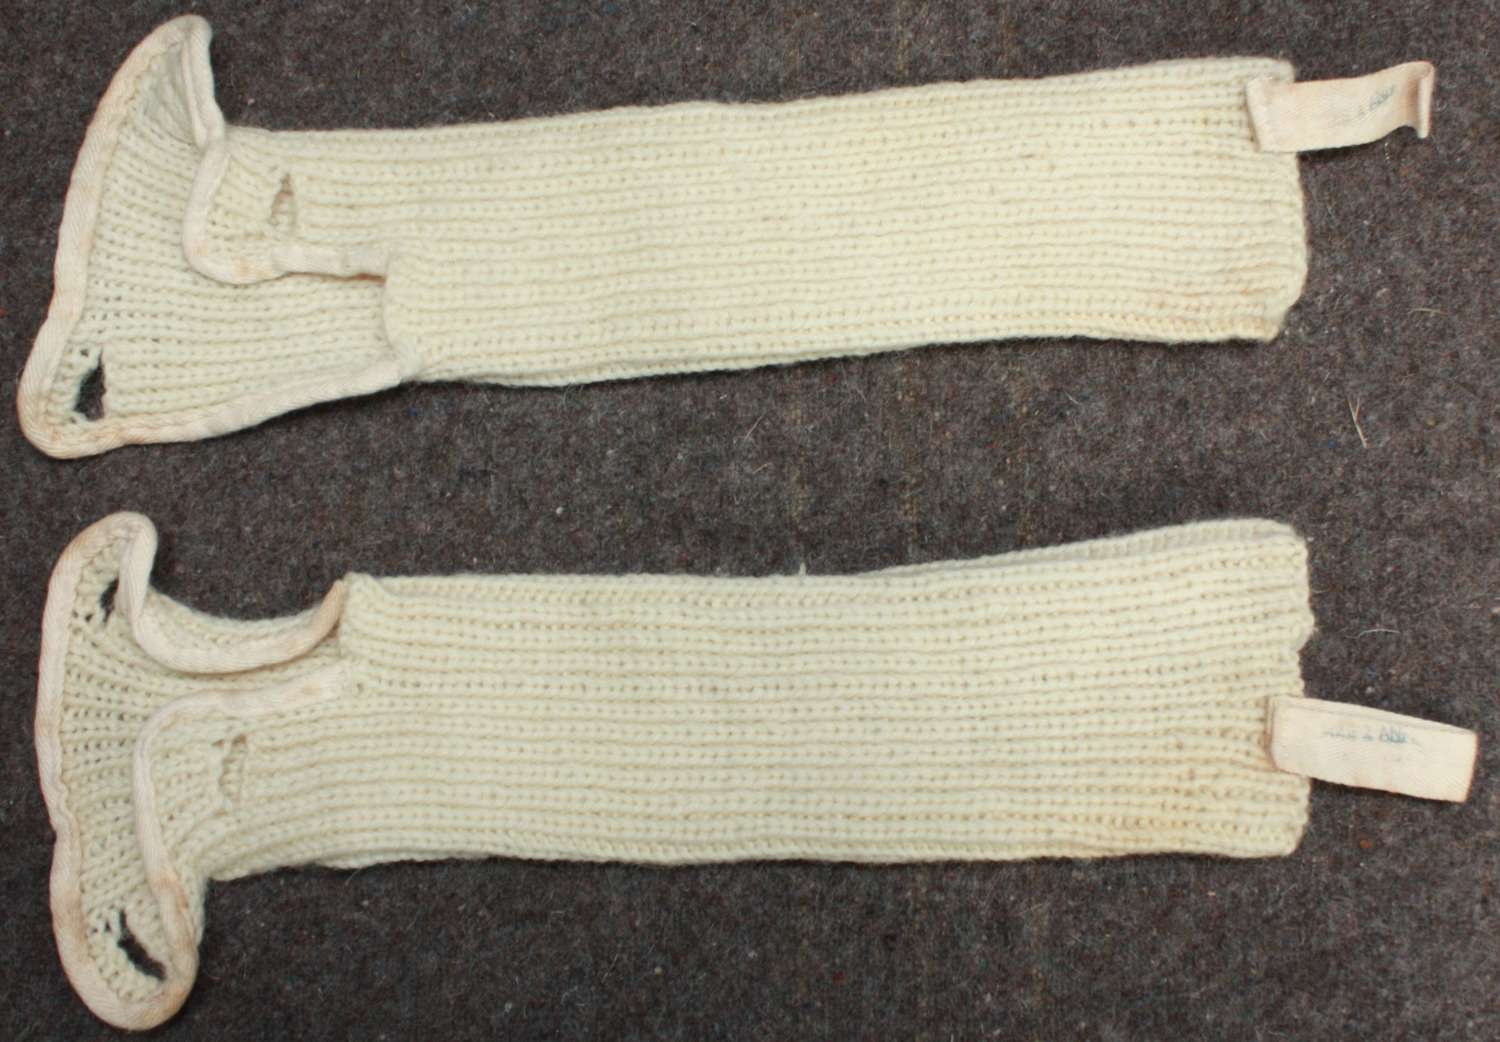 A WWII PERIOD OF ARM WARMERS WORN WITH THE SNOW EQUIPMENT